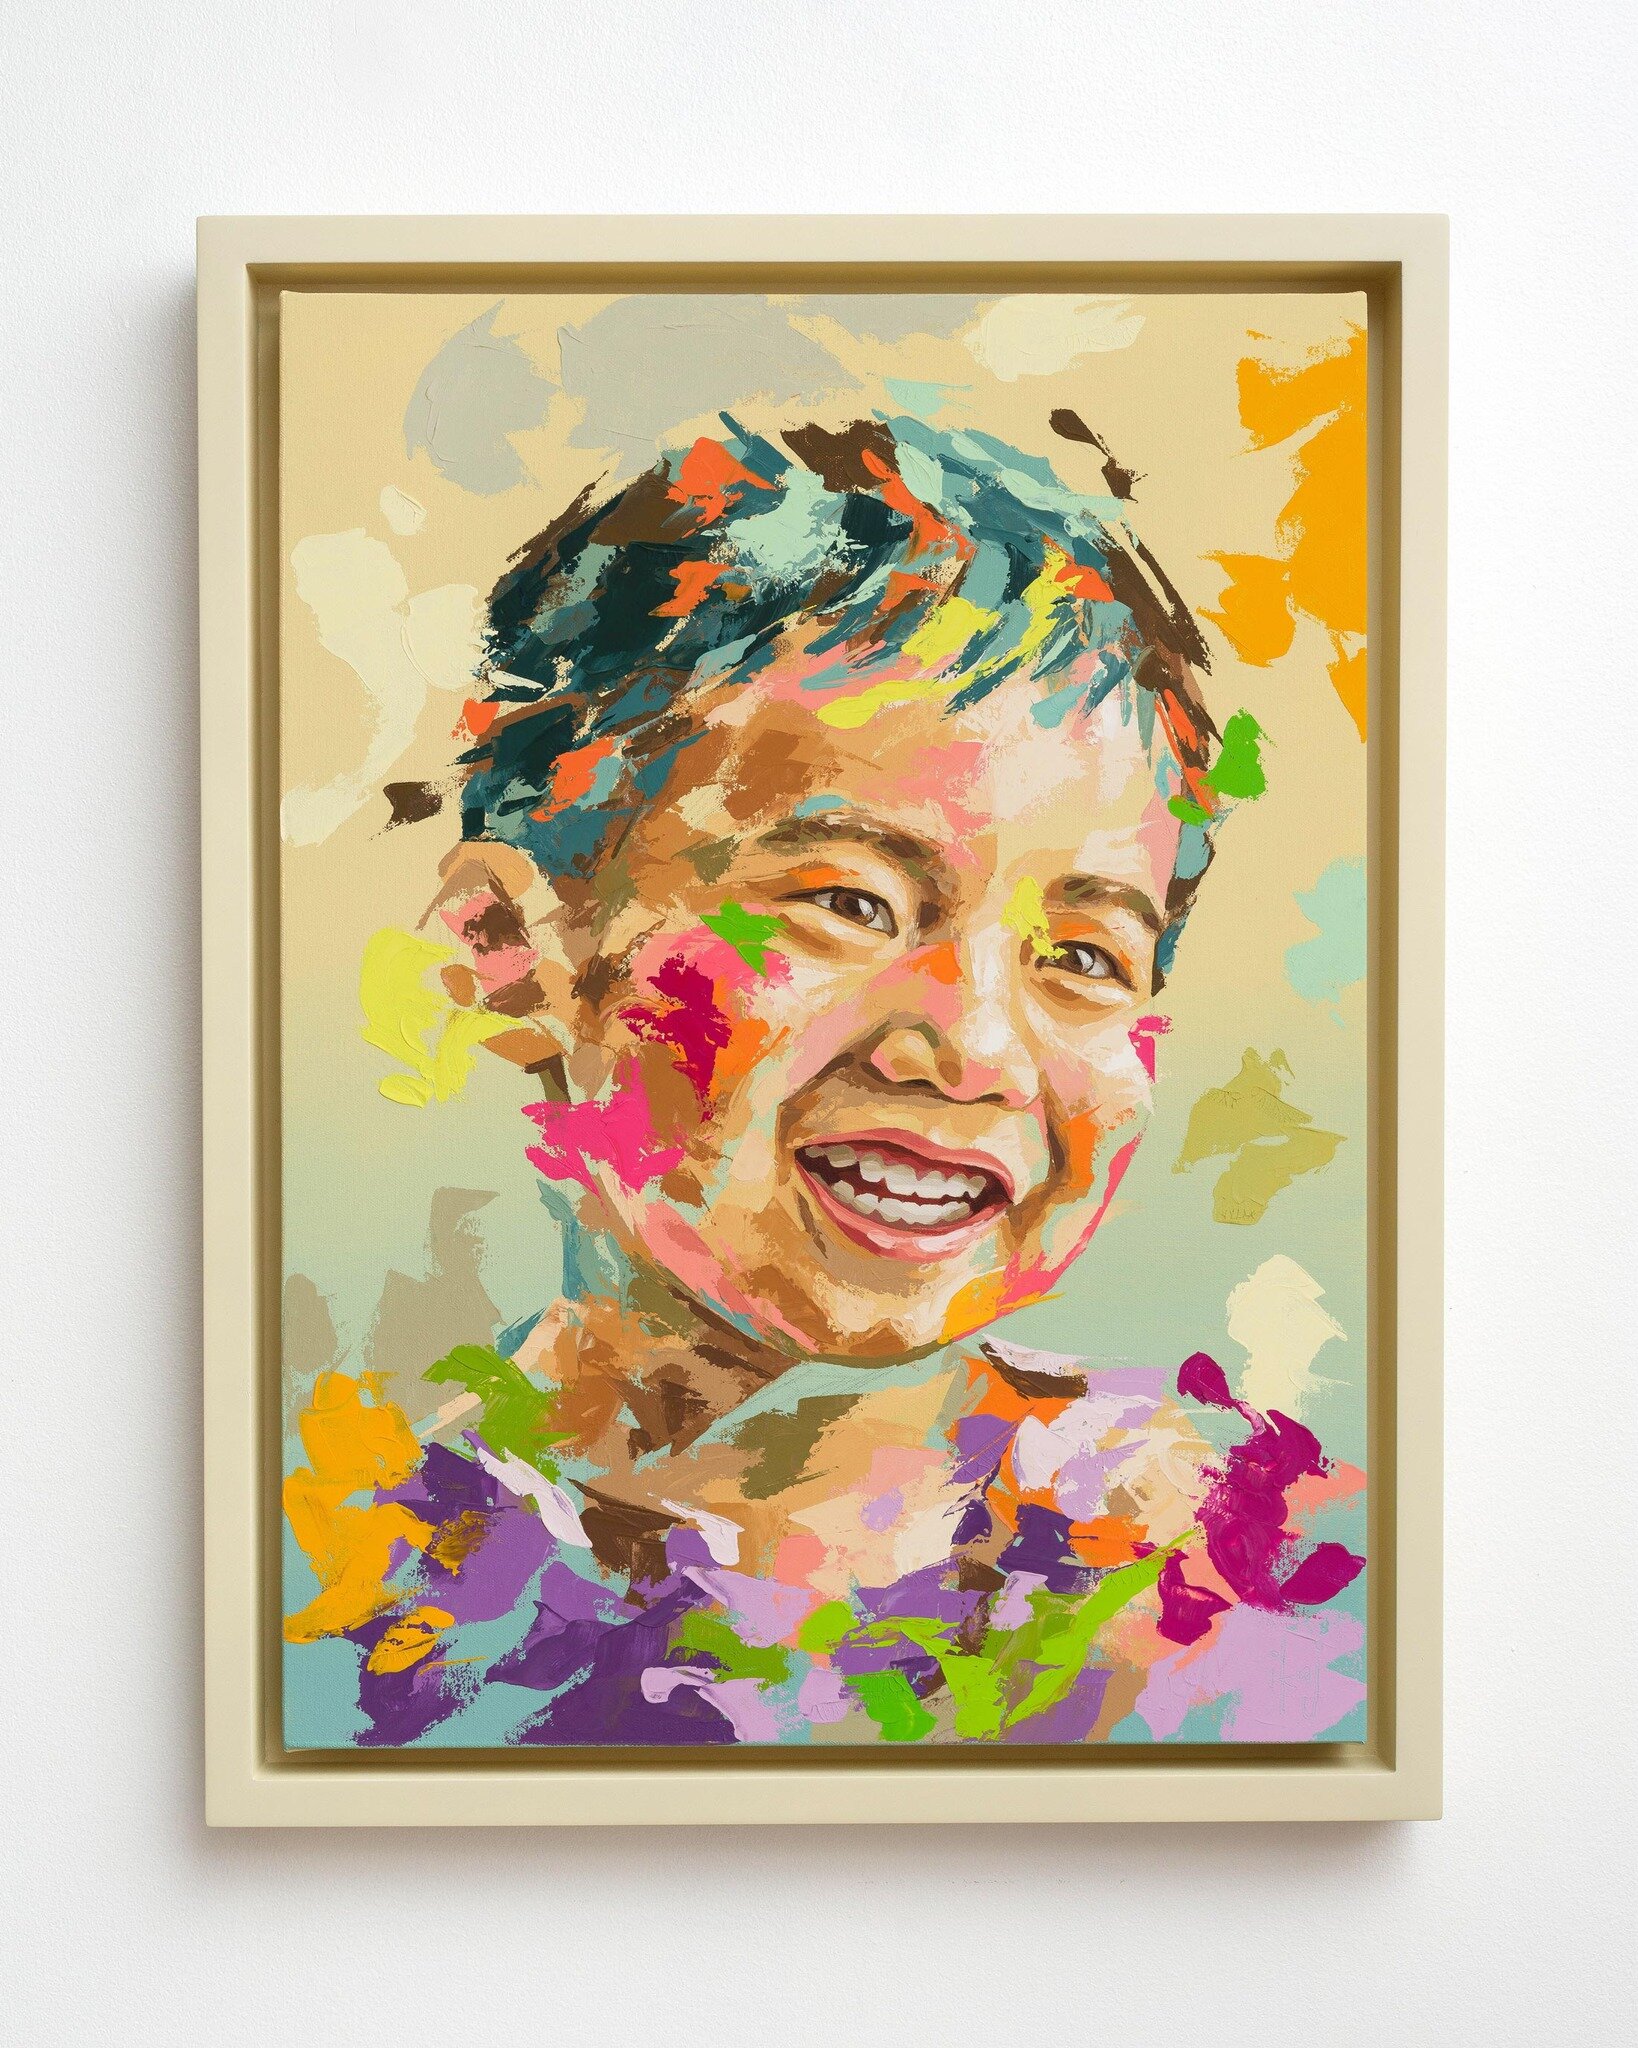 A boy's infectuous giggles and laughter. I hope this reminds him of how much he is cherished and loved by his parents every day. Your future shines bright, little one ☀️ 
 
18 x 24 inches, oil on canvas

#SunriseColors #PortraitPH #ArtPH #ikaj #portr